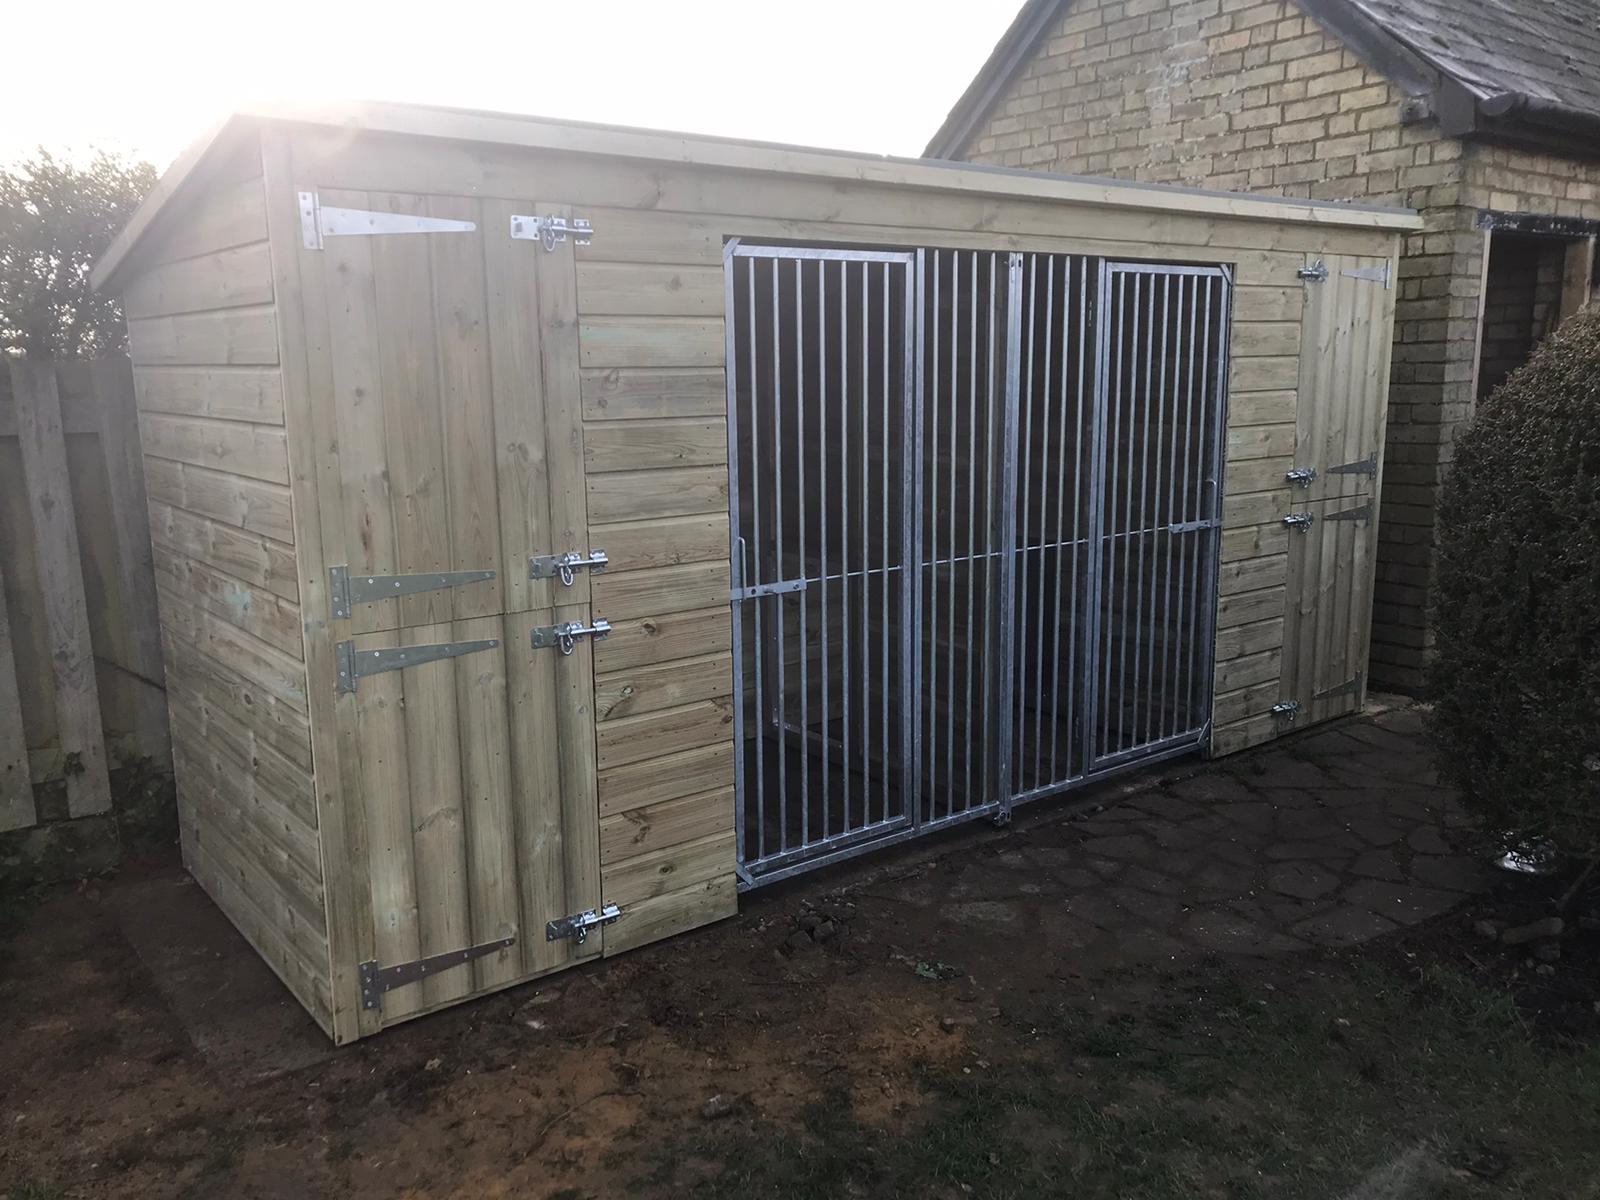 Bunbury 2 Bay Wooden Dog Kennel And Run 13ft (wide) x 4ft (deep) x 5'7ft (high)